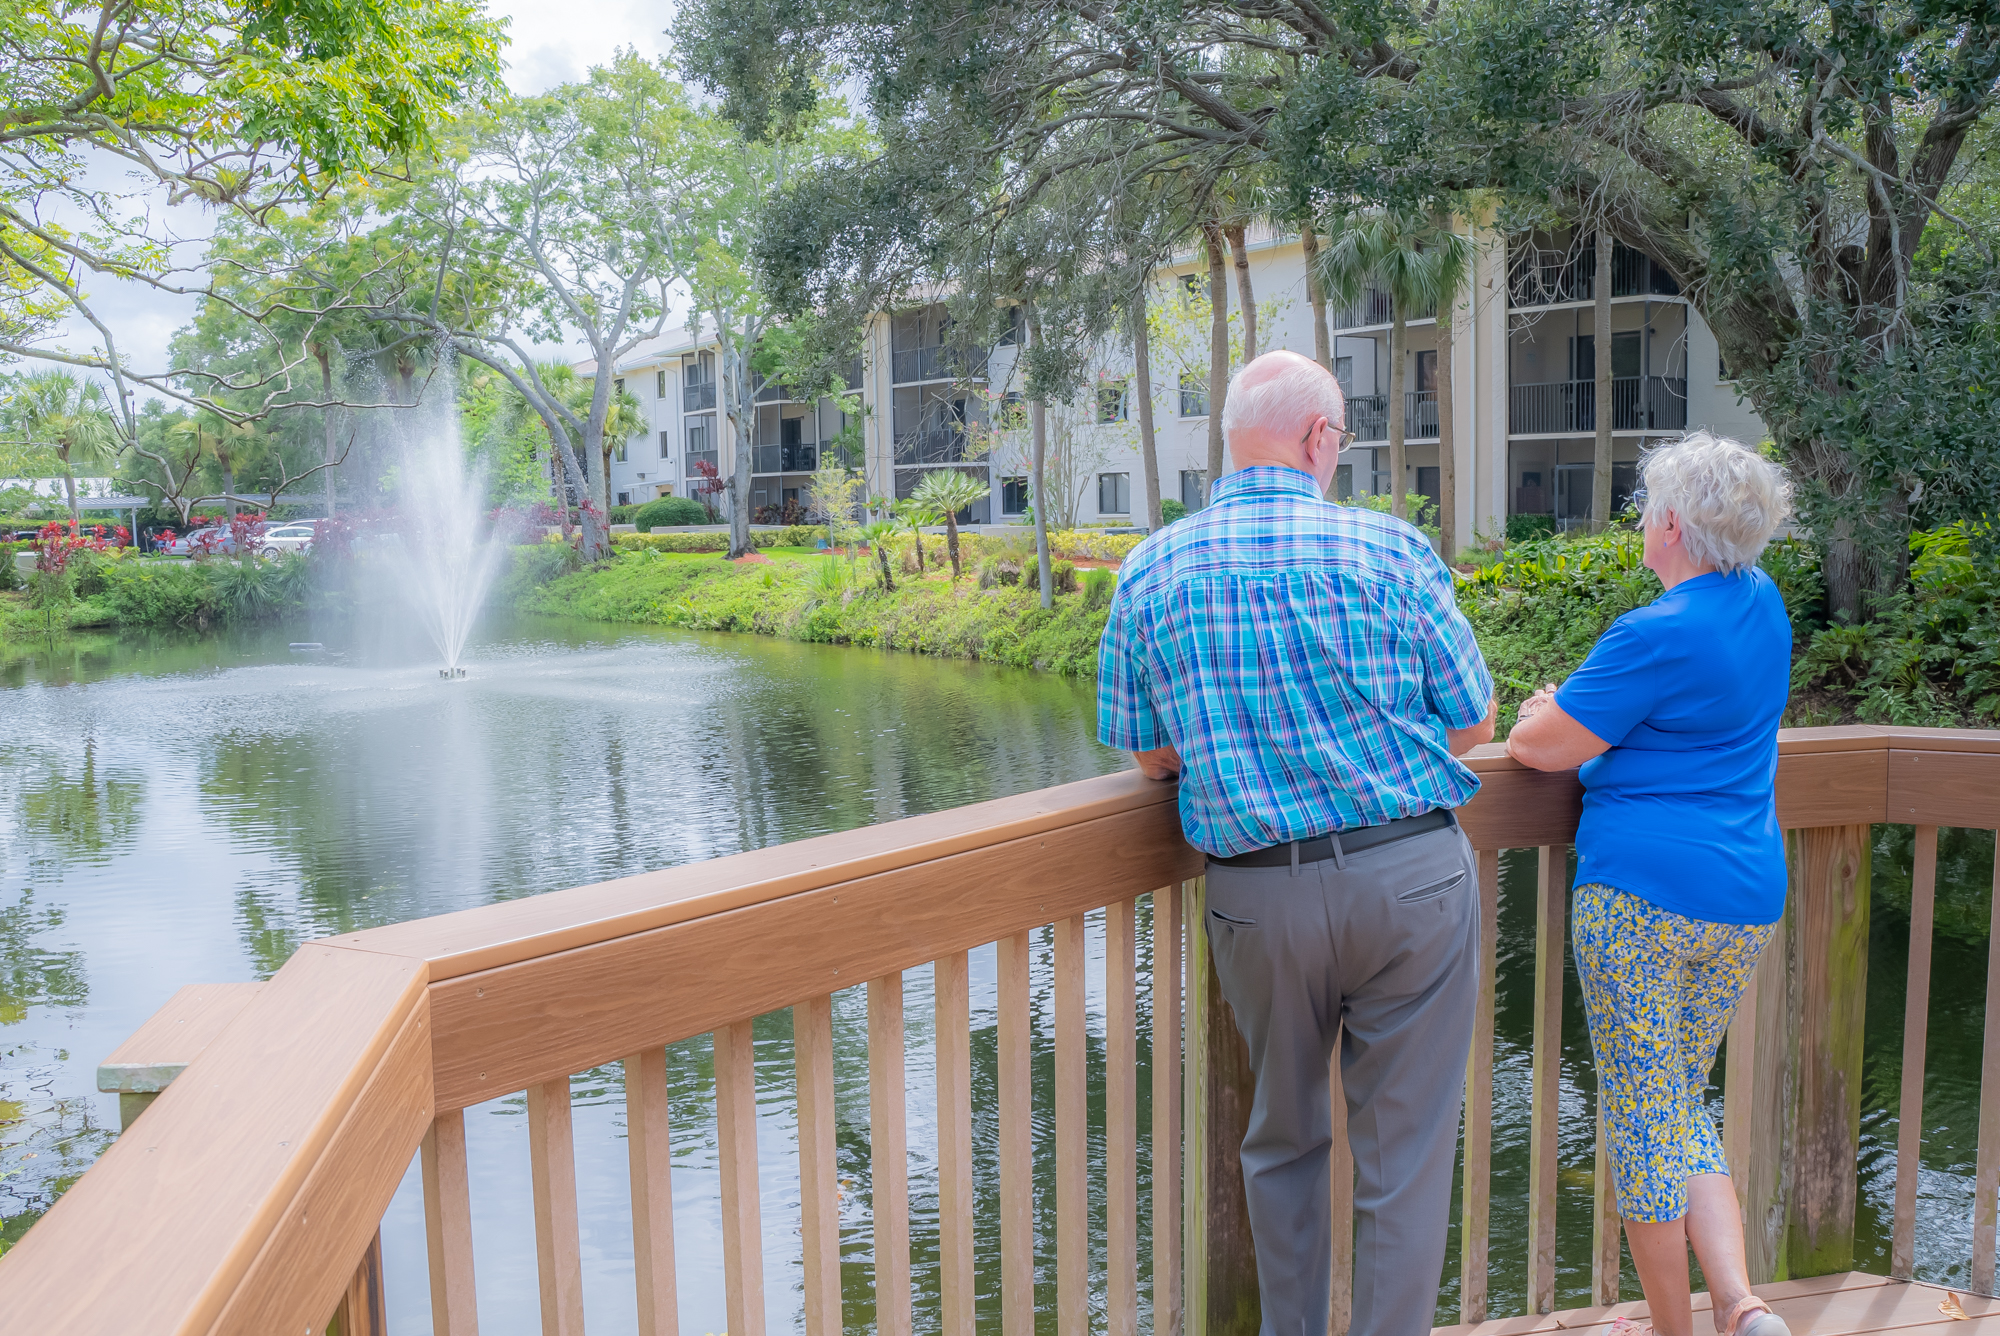 a man and women look out upon a lake with a fountain - Neighbors become life-long friends!